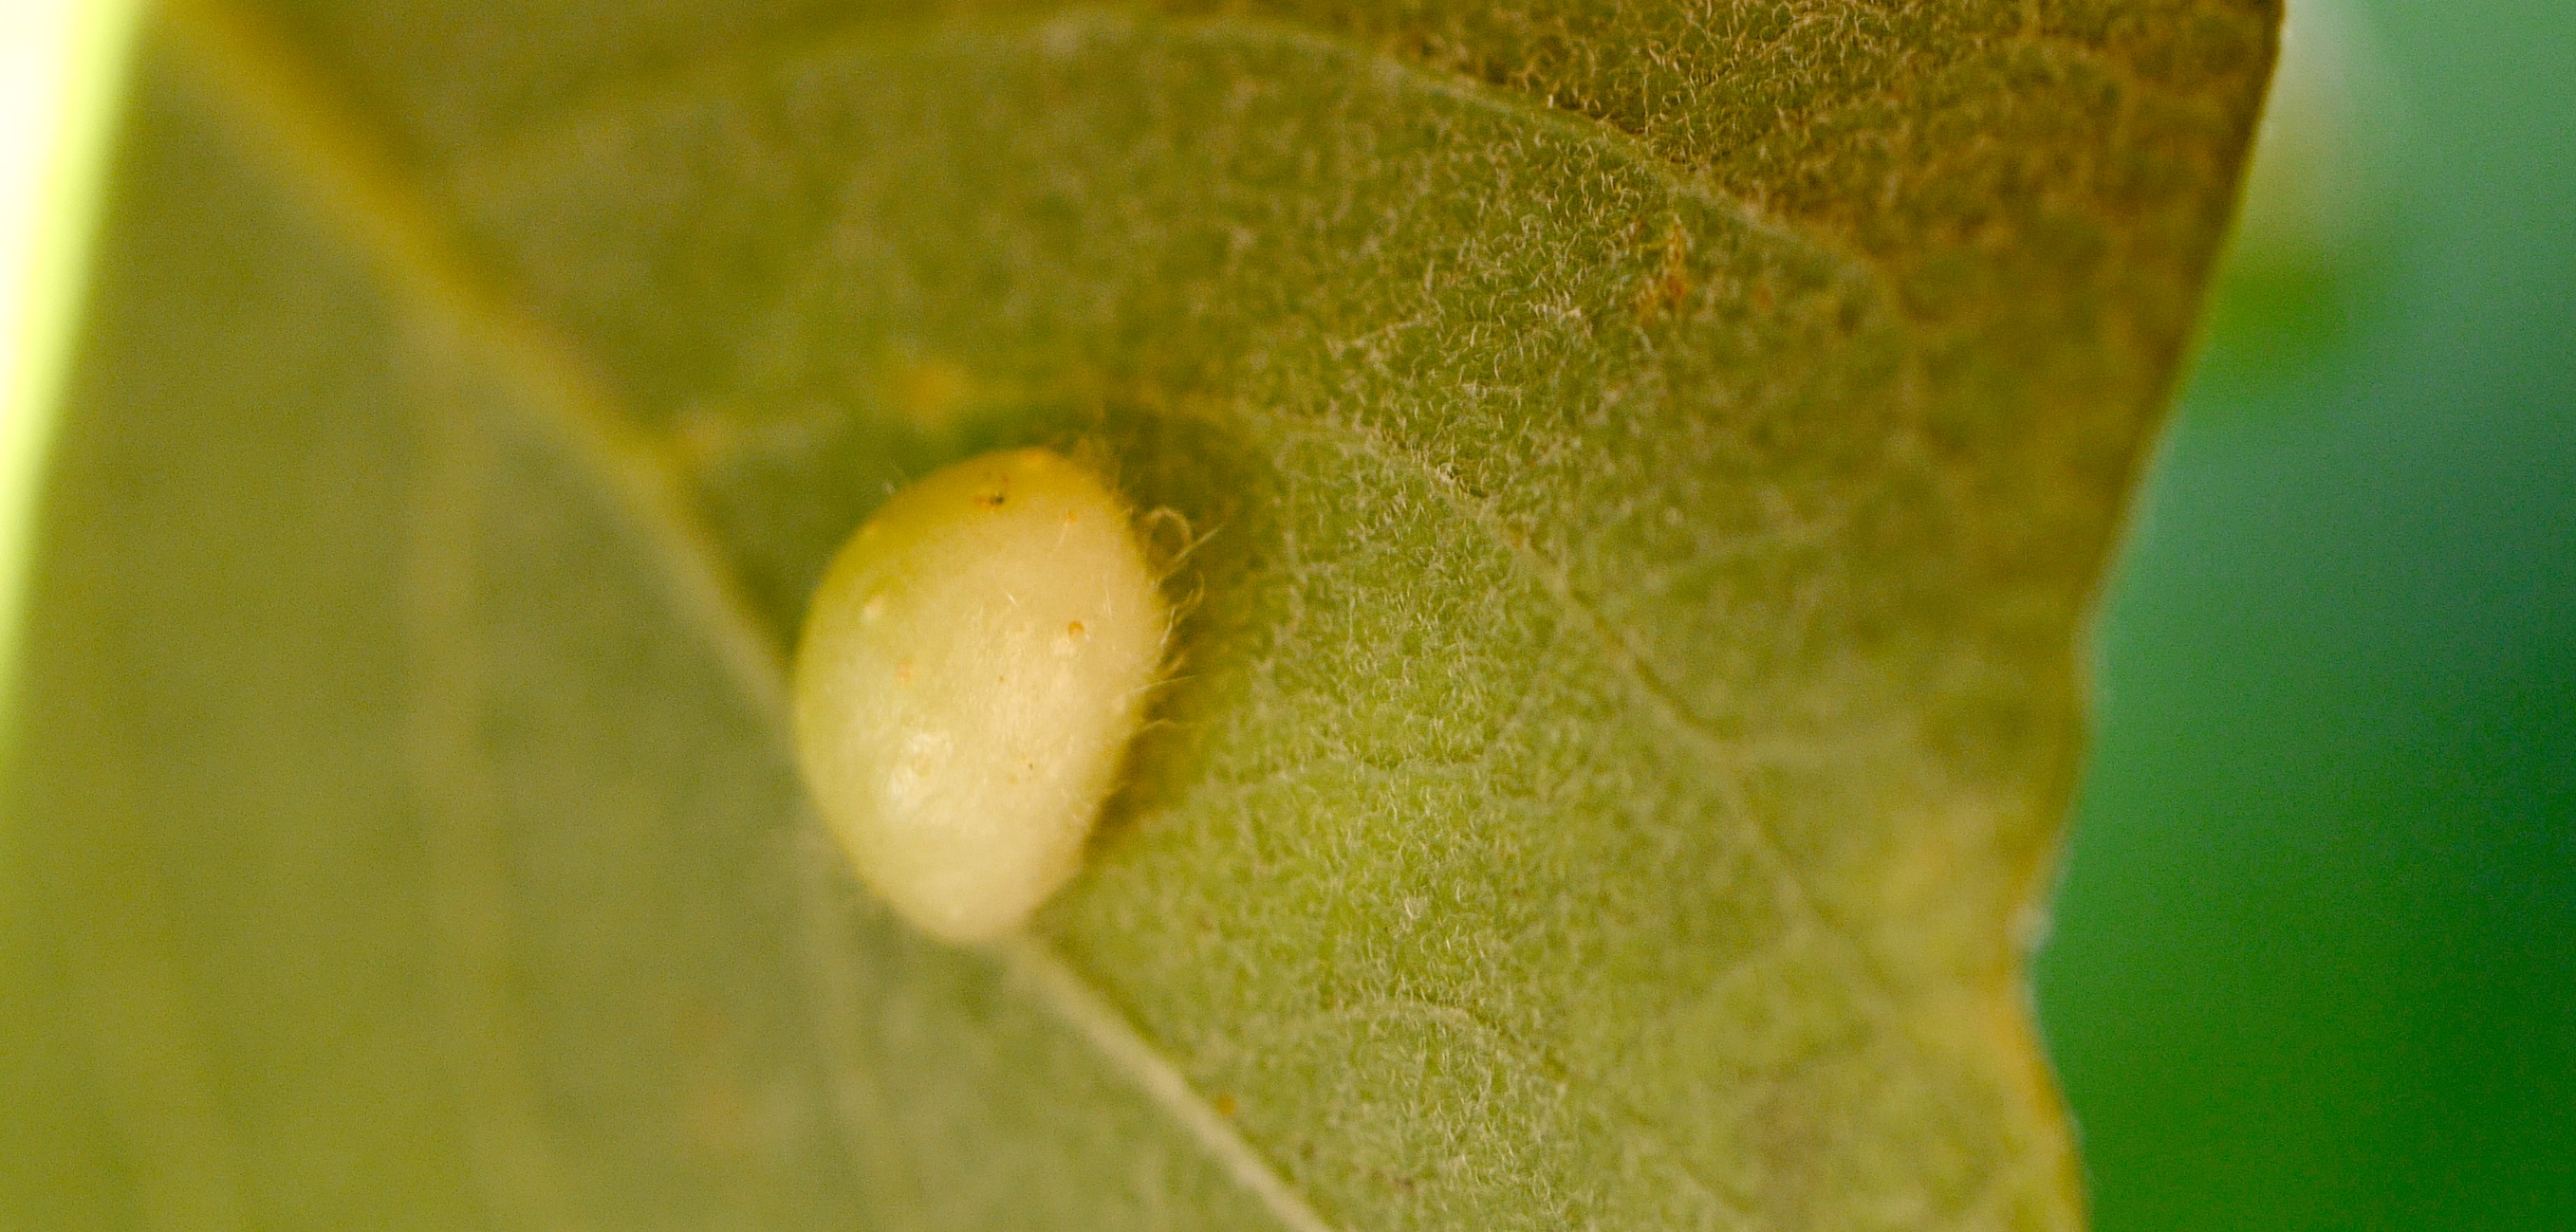 the plant leaf is almost covered by a single round white substance